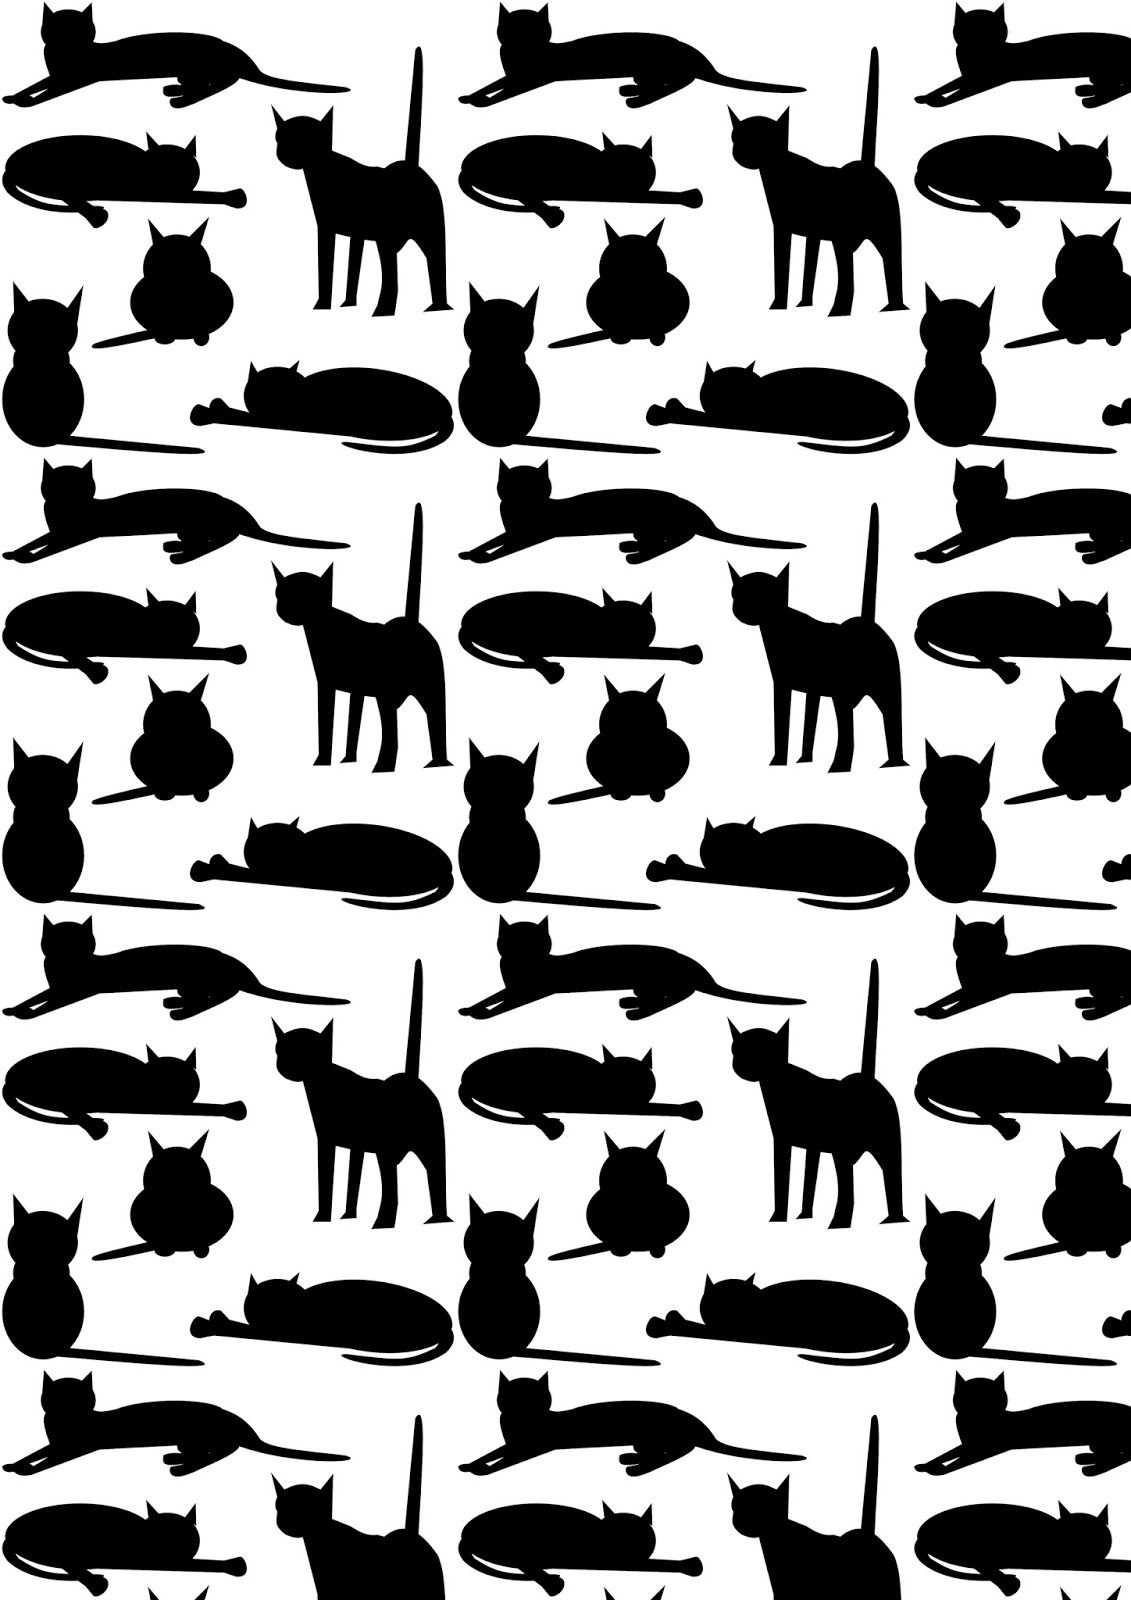 Today I Created Another Free Printable Cat Pattern Paper For You - Free Printable Cat Silhouette